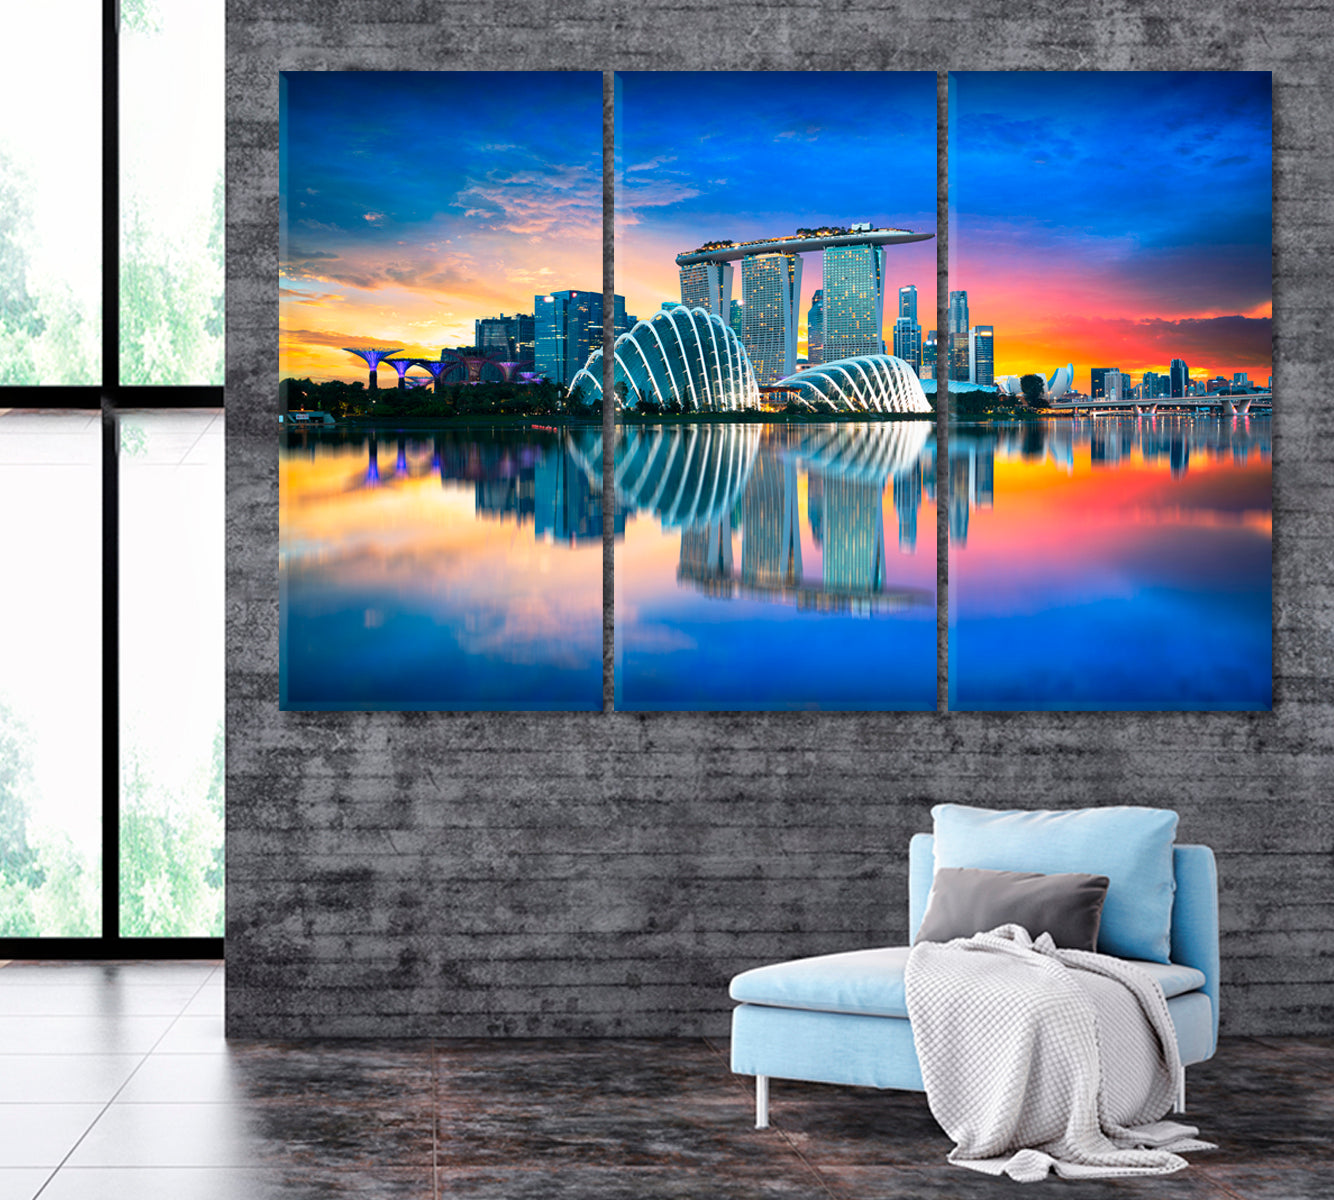 Singapore at Dusk Canvas Print ArtLexy 3 Panels 36"x24" inches 